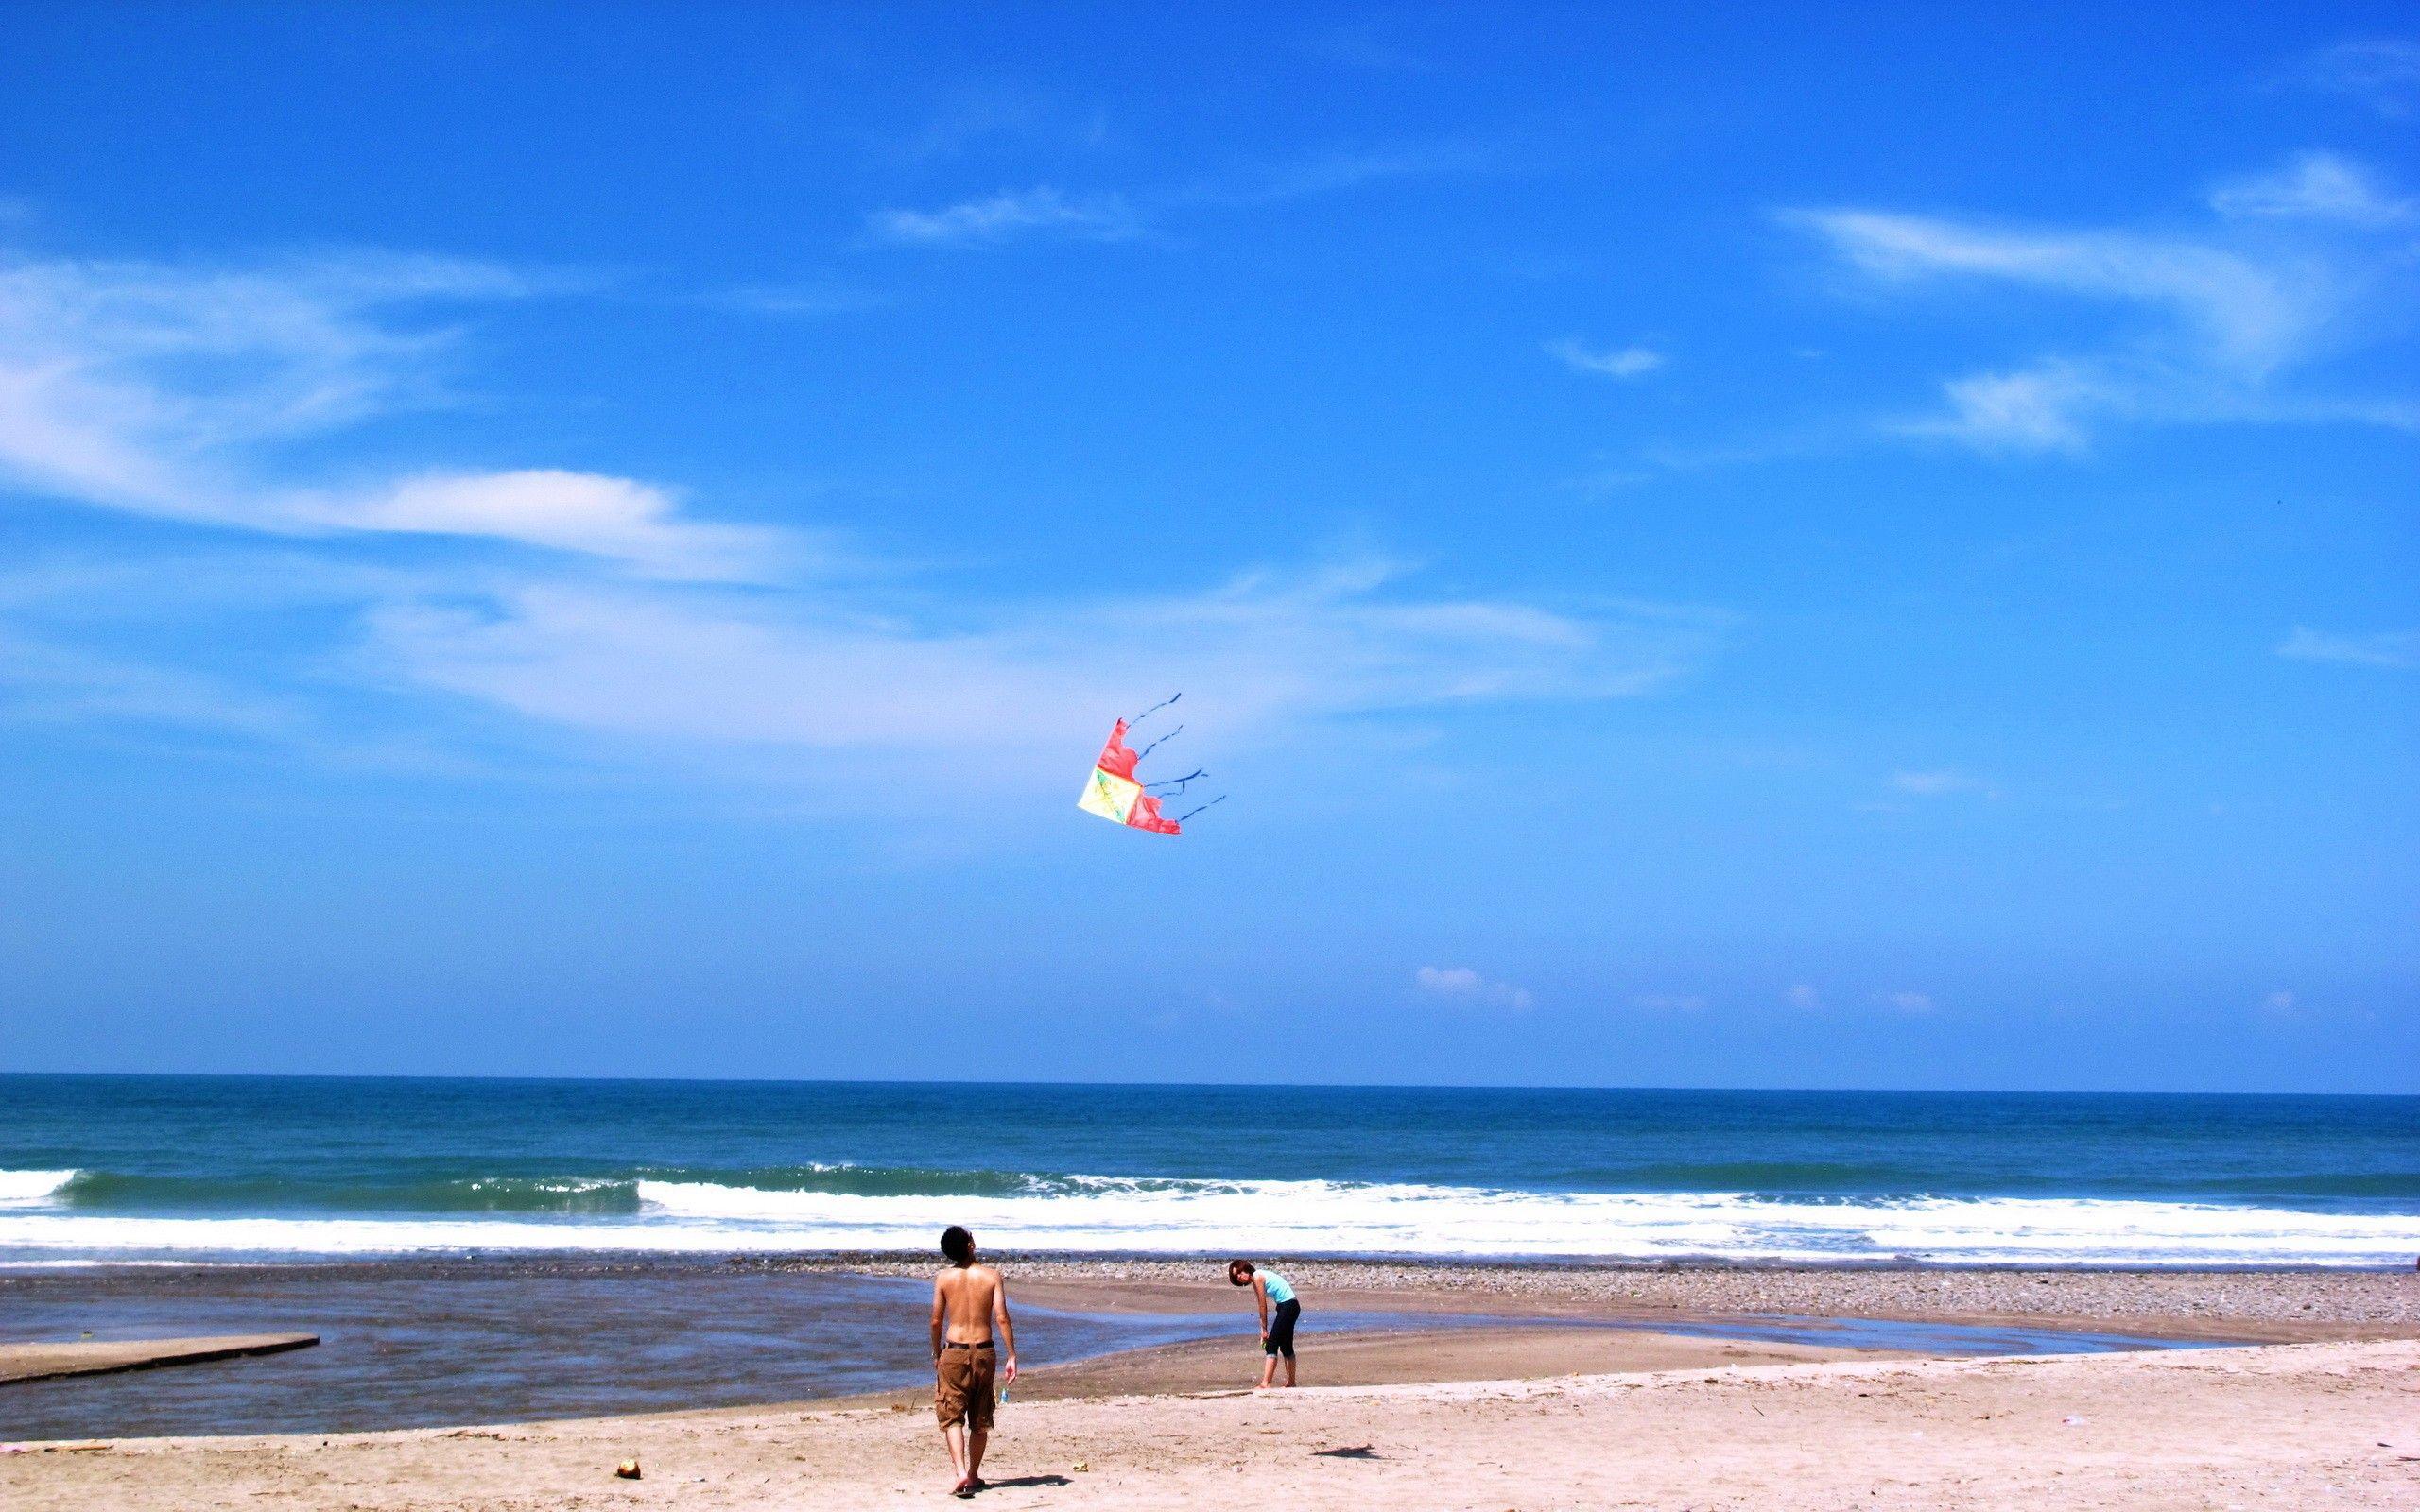 Kite flying in the sky wallpaper and image, picture